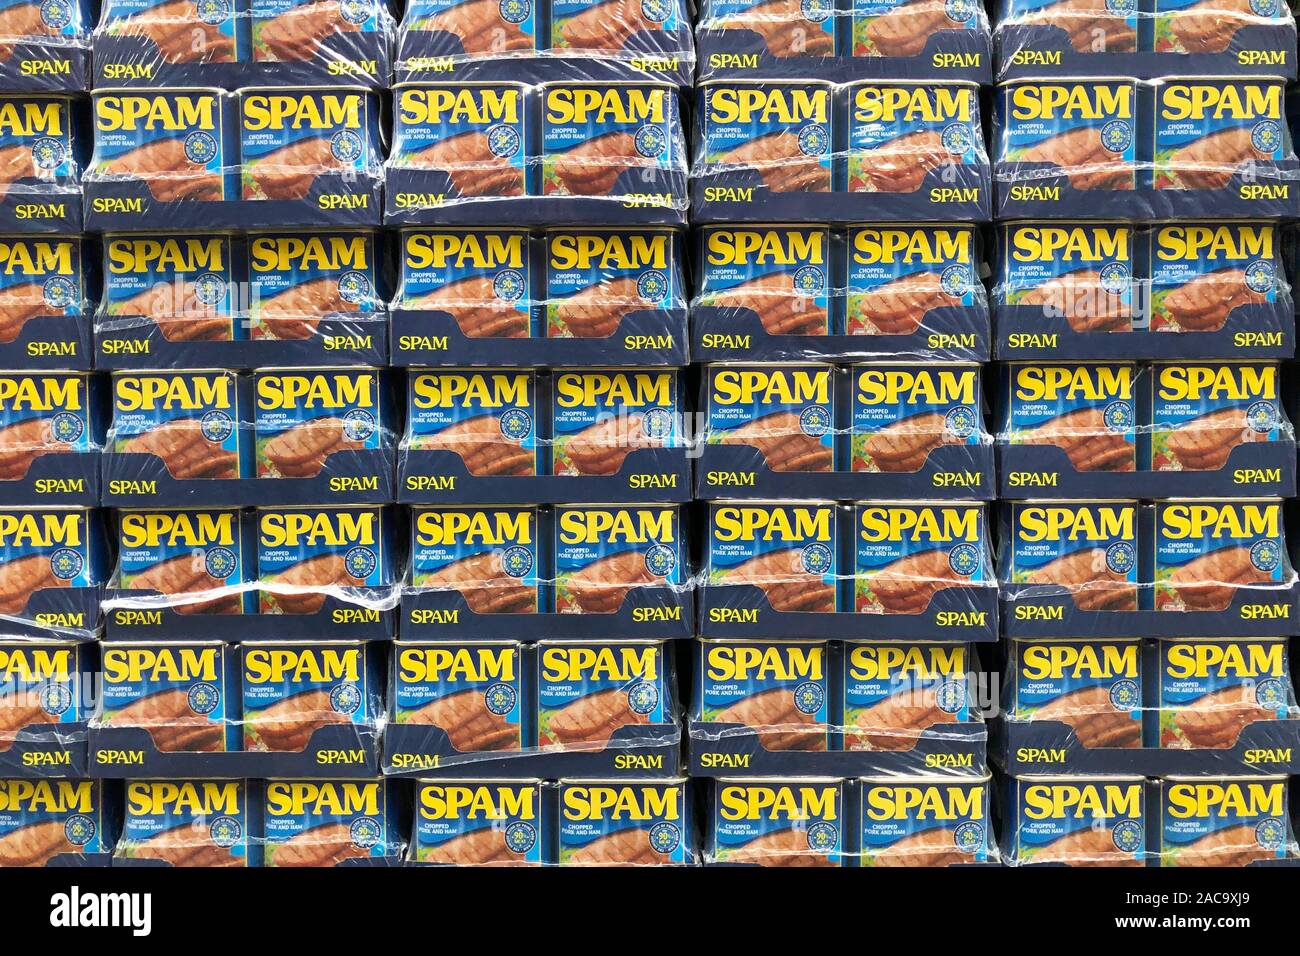 TINS OF SPAM PORK LUNCHEON MEAT, LONDON – JULY 06 2019, Tins or cans of Spam pork luncheon meat, concept photo for unwanted spam or junk email Stock Photo